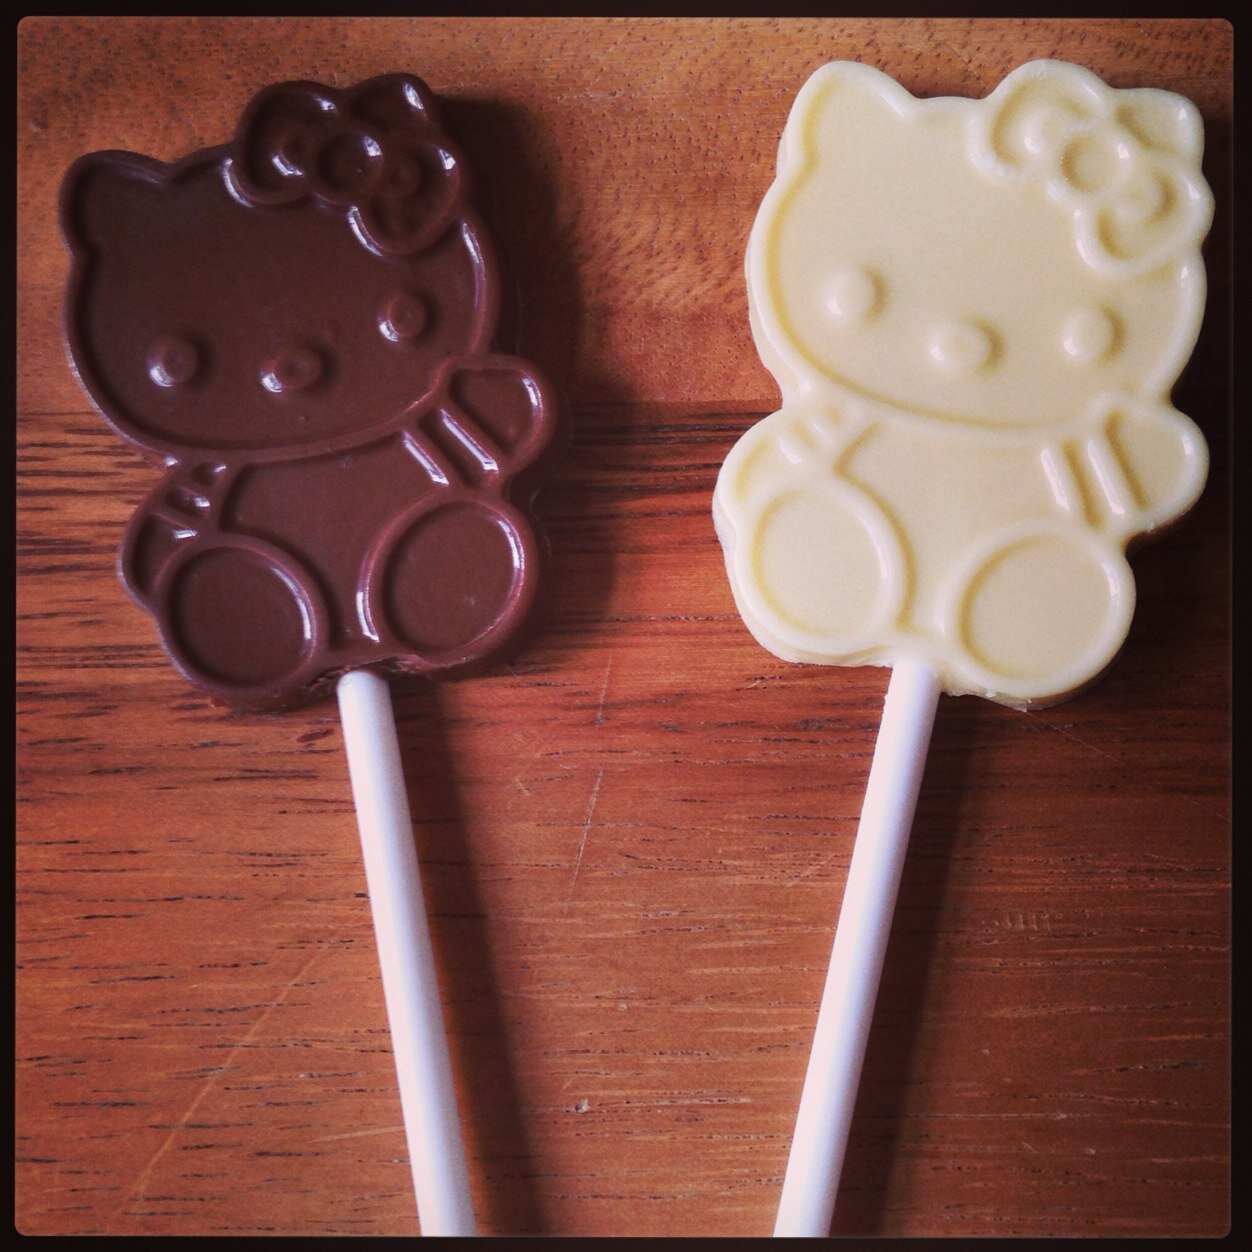 Chocolate Lollipops and treats for any special occasion in milk, white or dark quality chocolate! Dairy free chocolate available! HolliesLollies@yahoo.co.uk